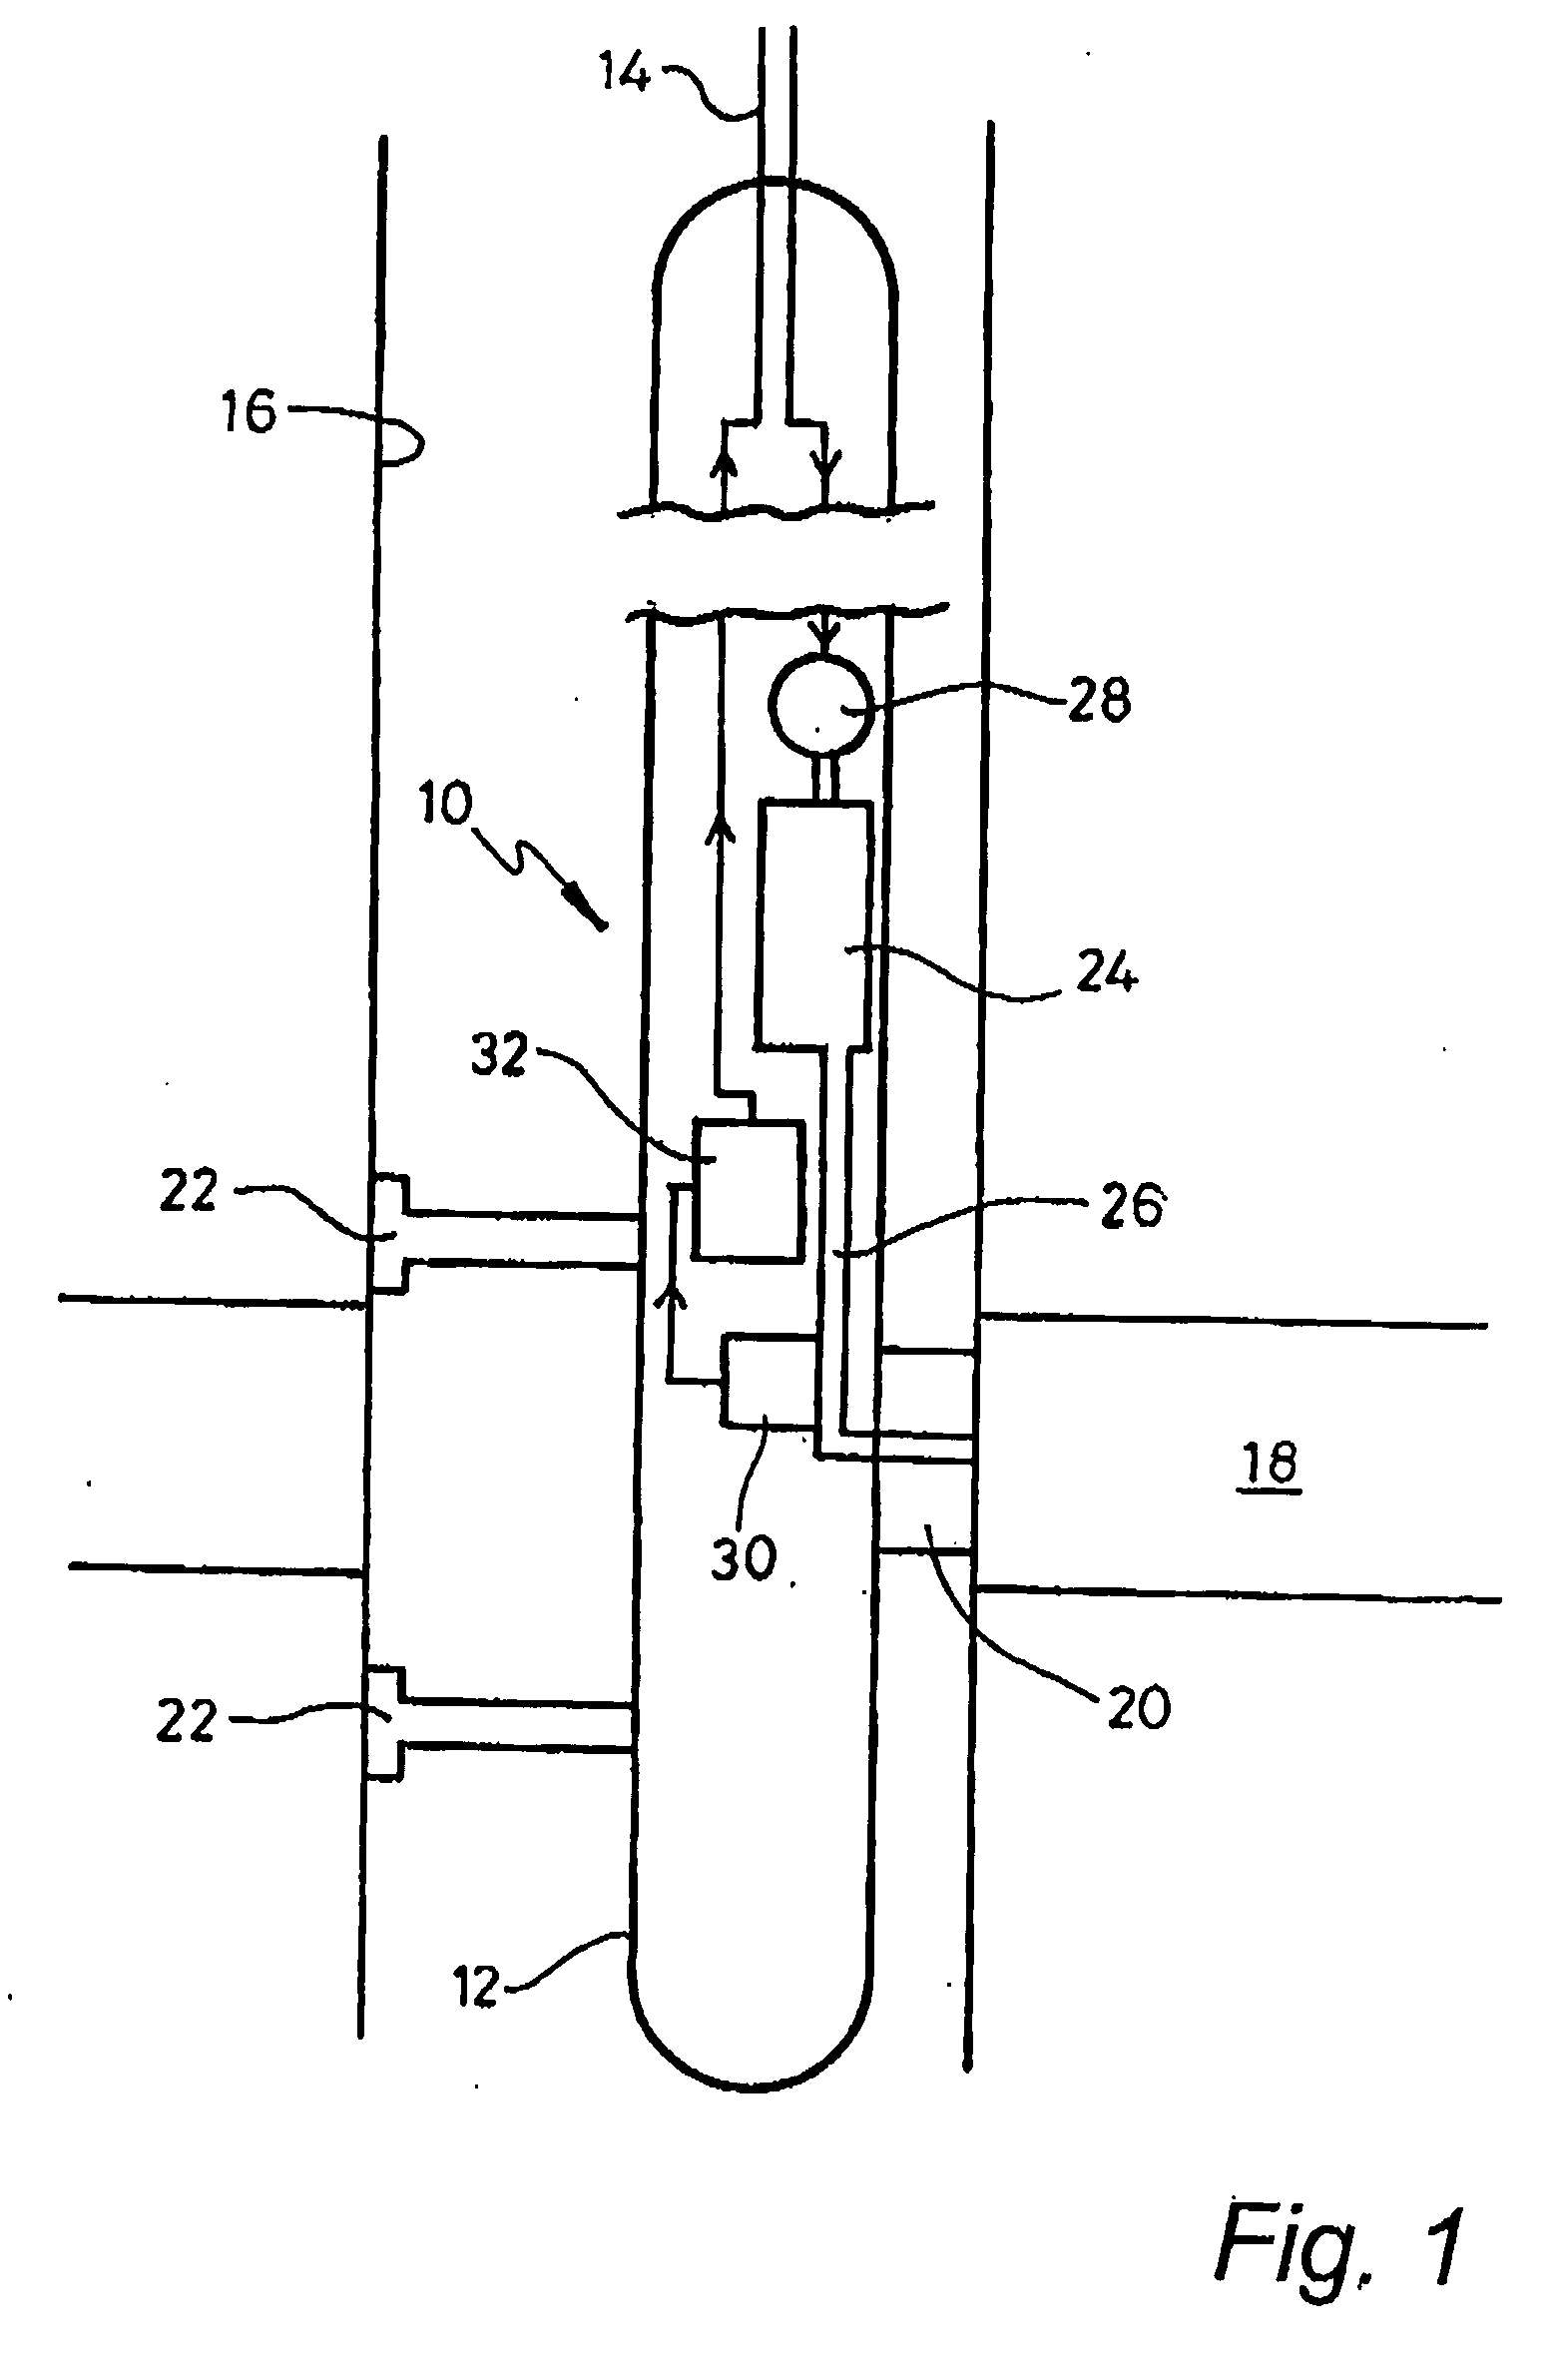 Methods and apparatus for the measurement of hydrogen sulphide and thiols in fluids